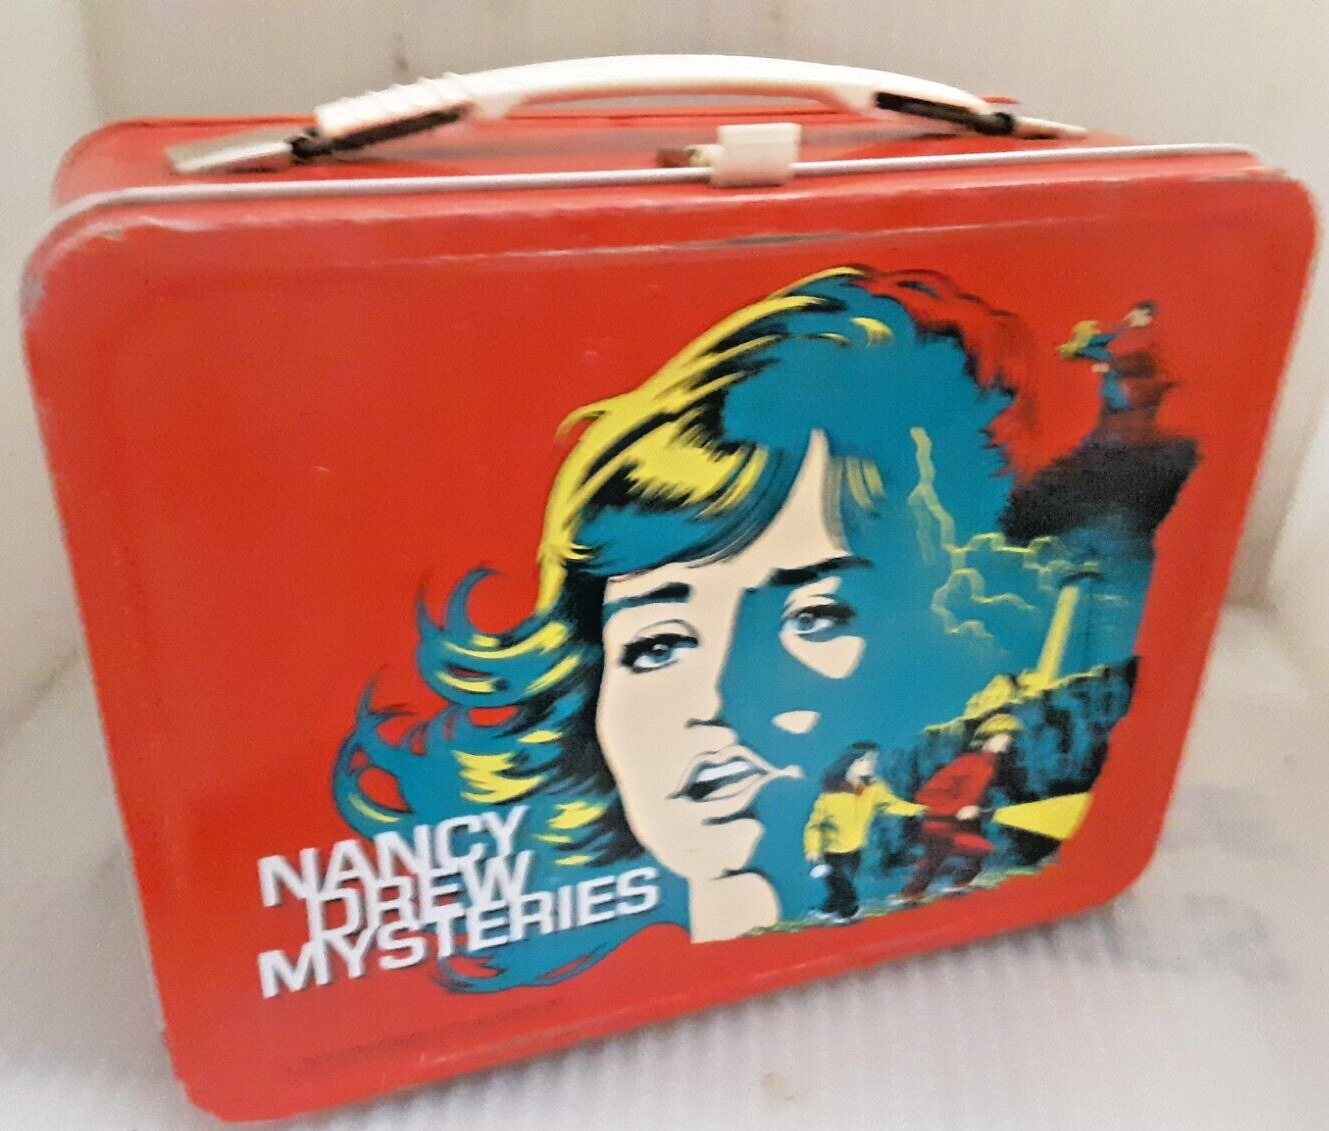 RARE 1977 Nancy Drew Mysteries Metal Lunch Box By Thermos Brand ~ Nice Lunchbox